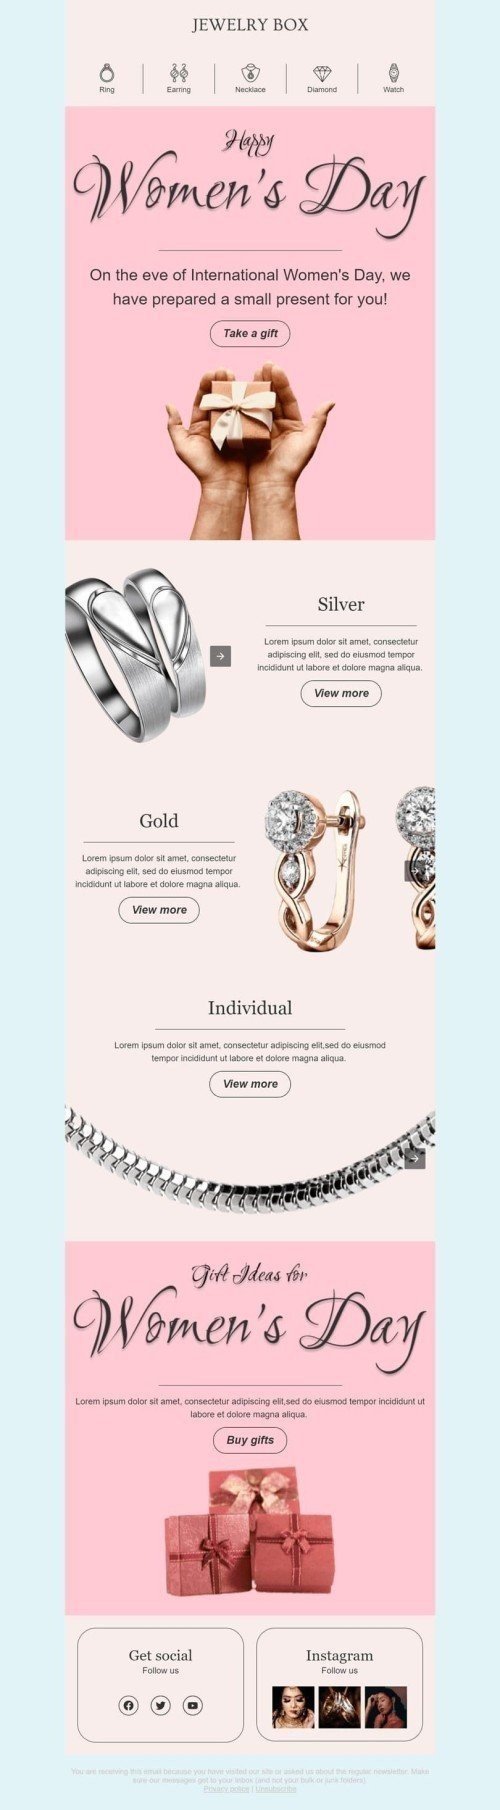 Women's Day Email Template «Jewelry box» for Jewelry industry mobile view